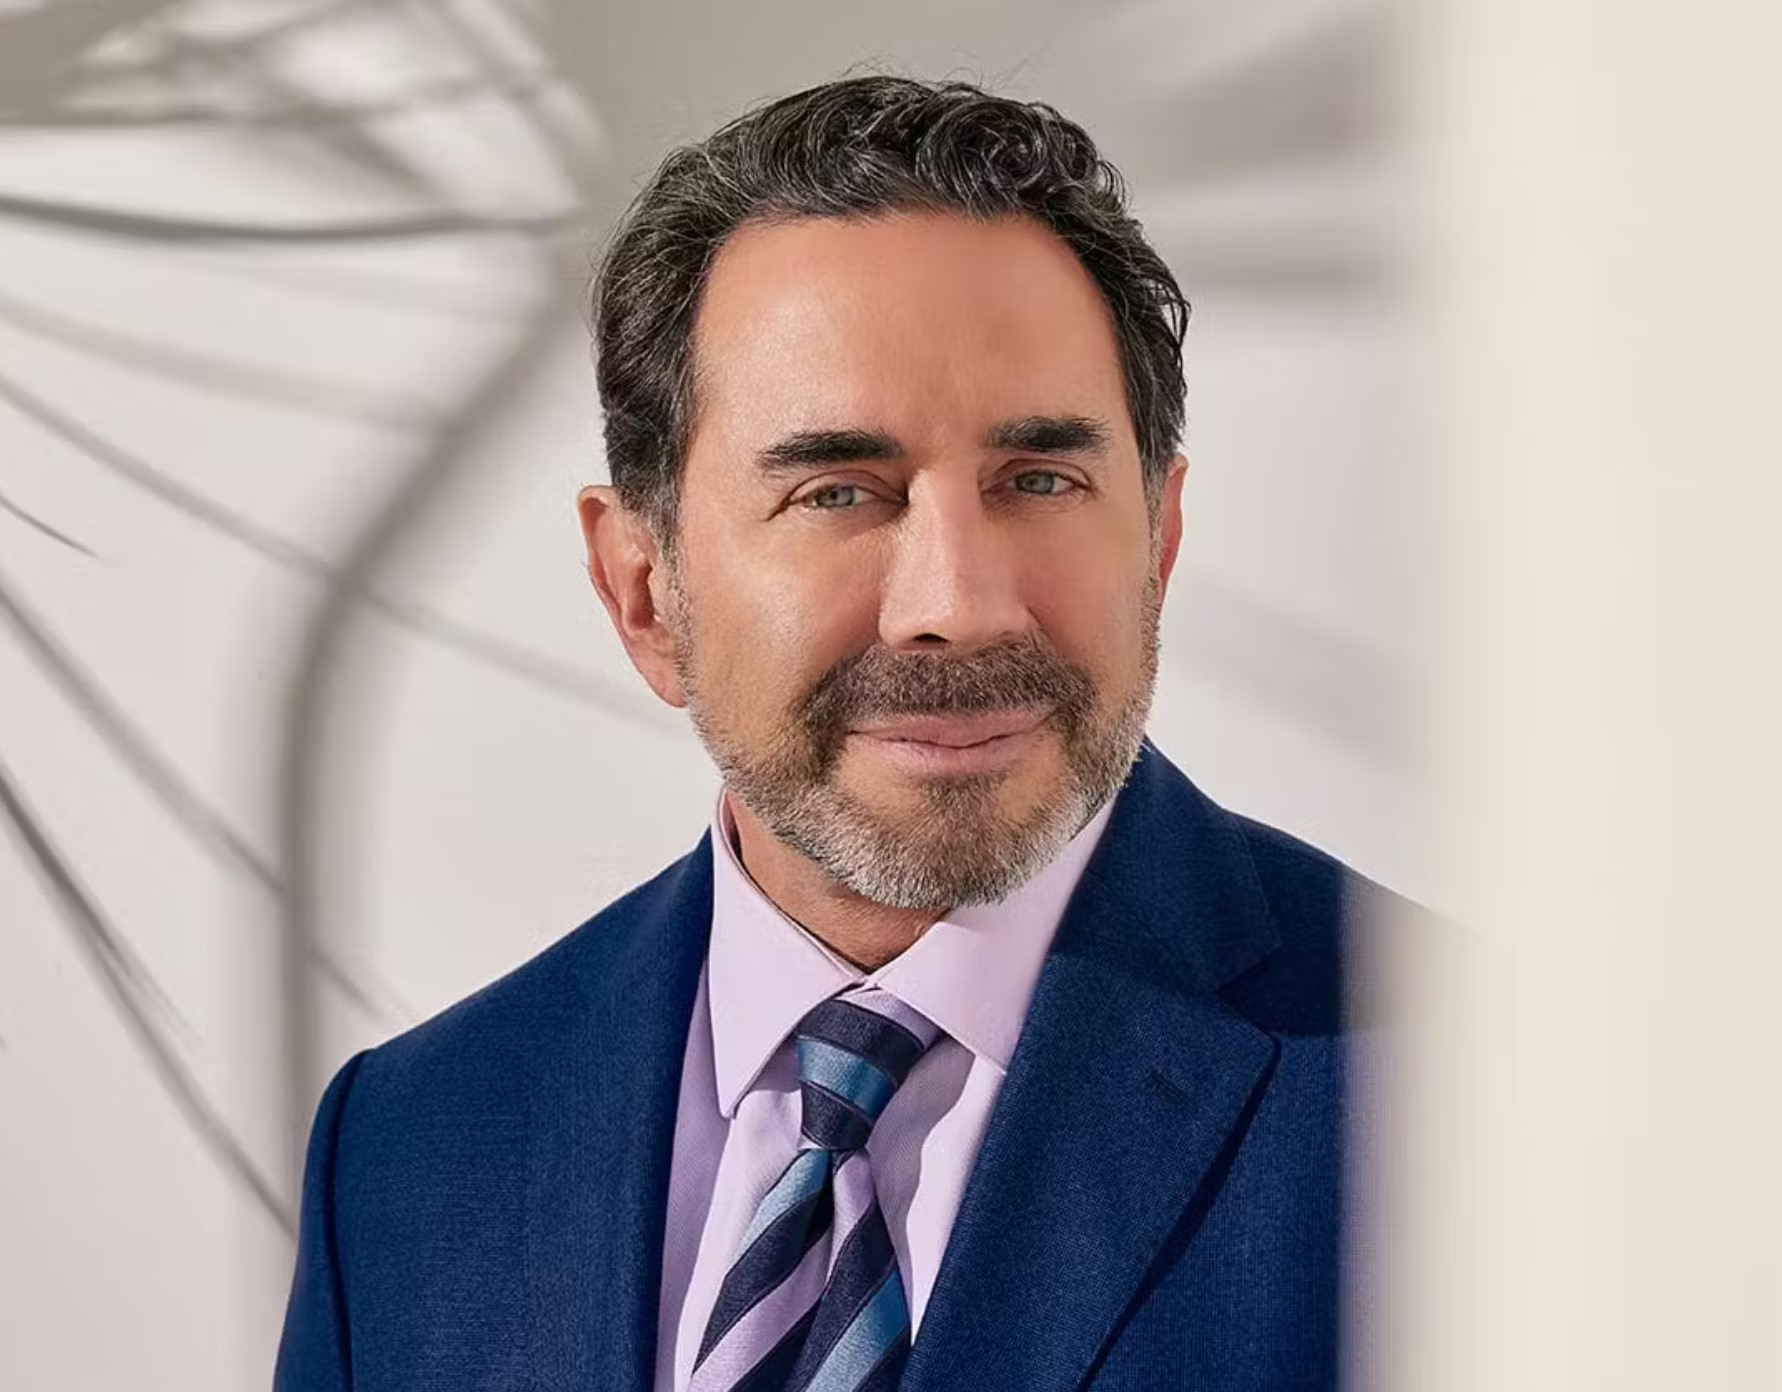 Botched star Dr. Paul Nassif on face lift surgery and new home